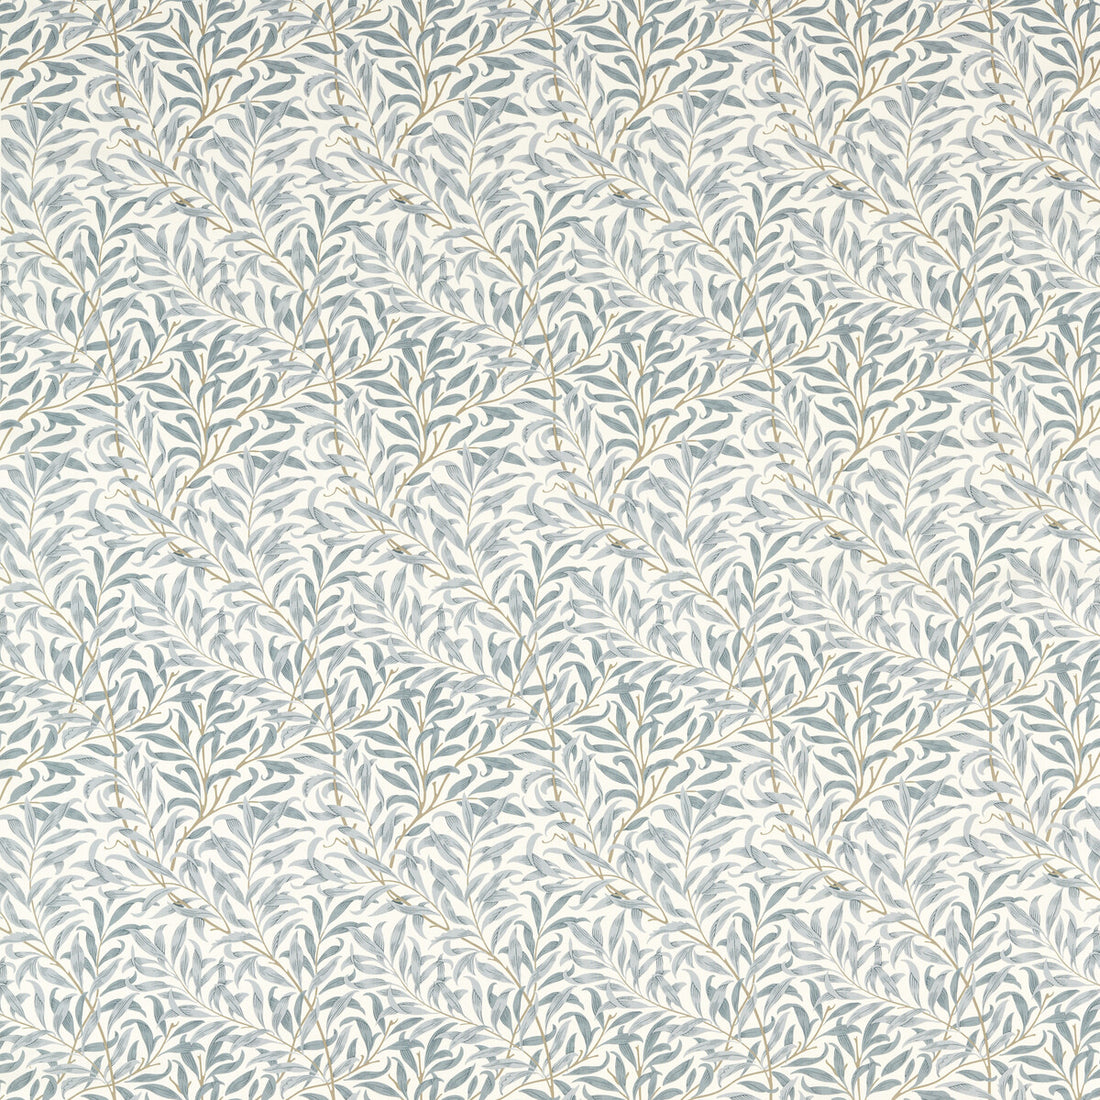 Willow Boughs fabric in mineral color - pattern F1679/02.CAC.0 - by Clarke And Clarke in the Clarke &amp; Clarke William Morris Designs collection